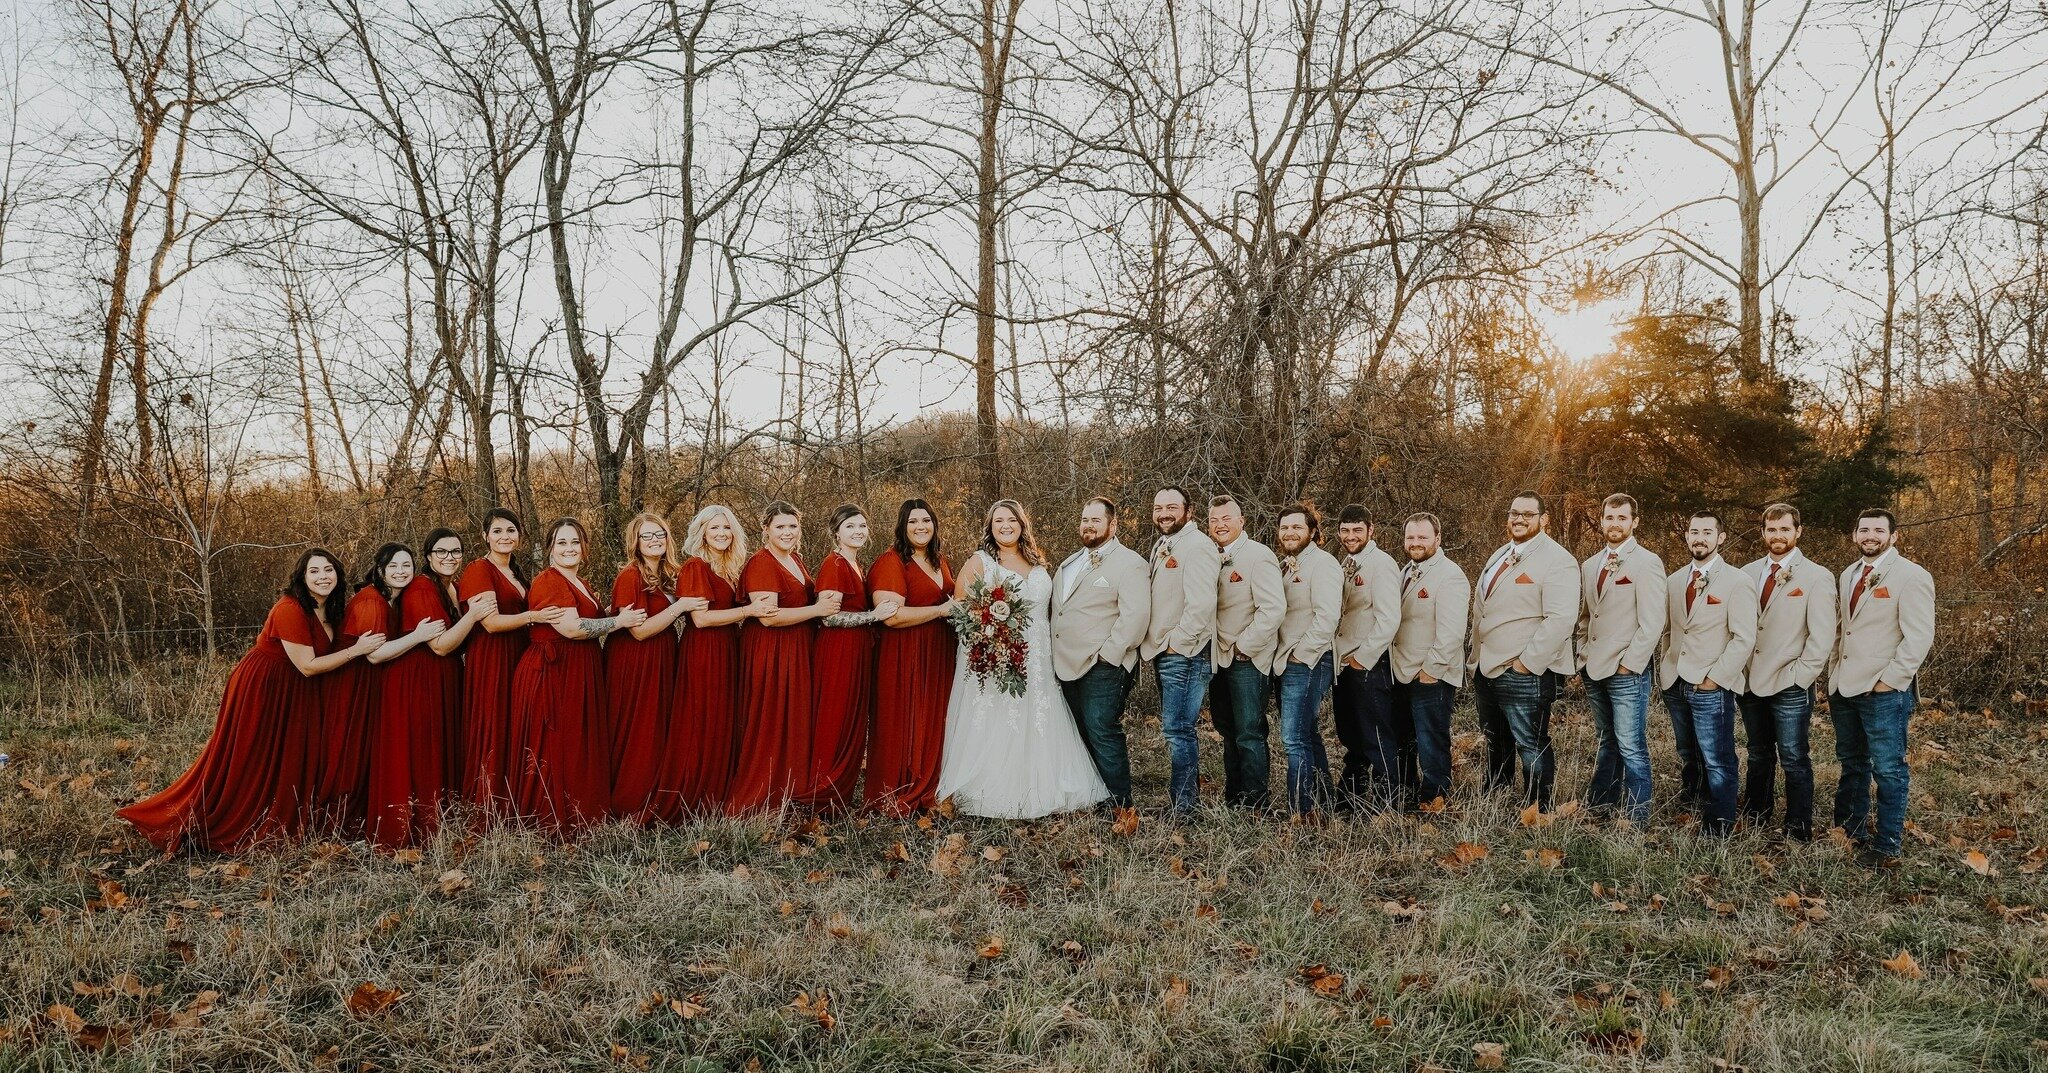 Perfect place to do large bridal party shots on a fall day!

Couple: Lexi &amp; Zack
Officiant: Shane Ryerson
Photographer: Daniel Thompson Film &amp; Photography 
Videography: MadLoud Photography + Videography 
Florist: Hobby Lobby 
Cake: Libby Nowl